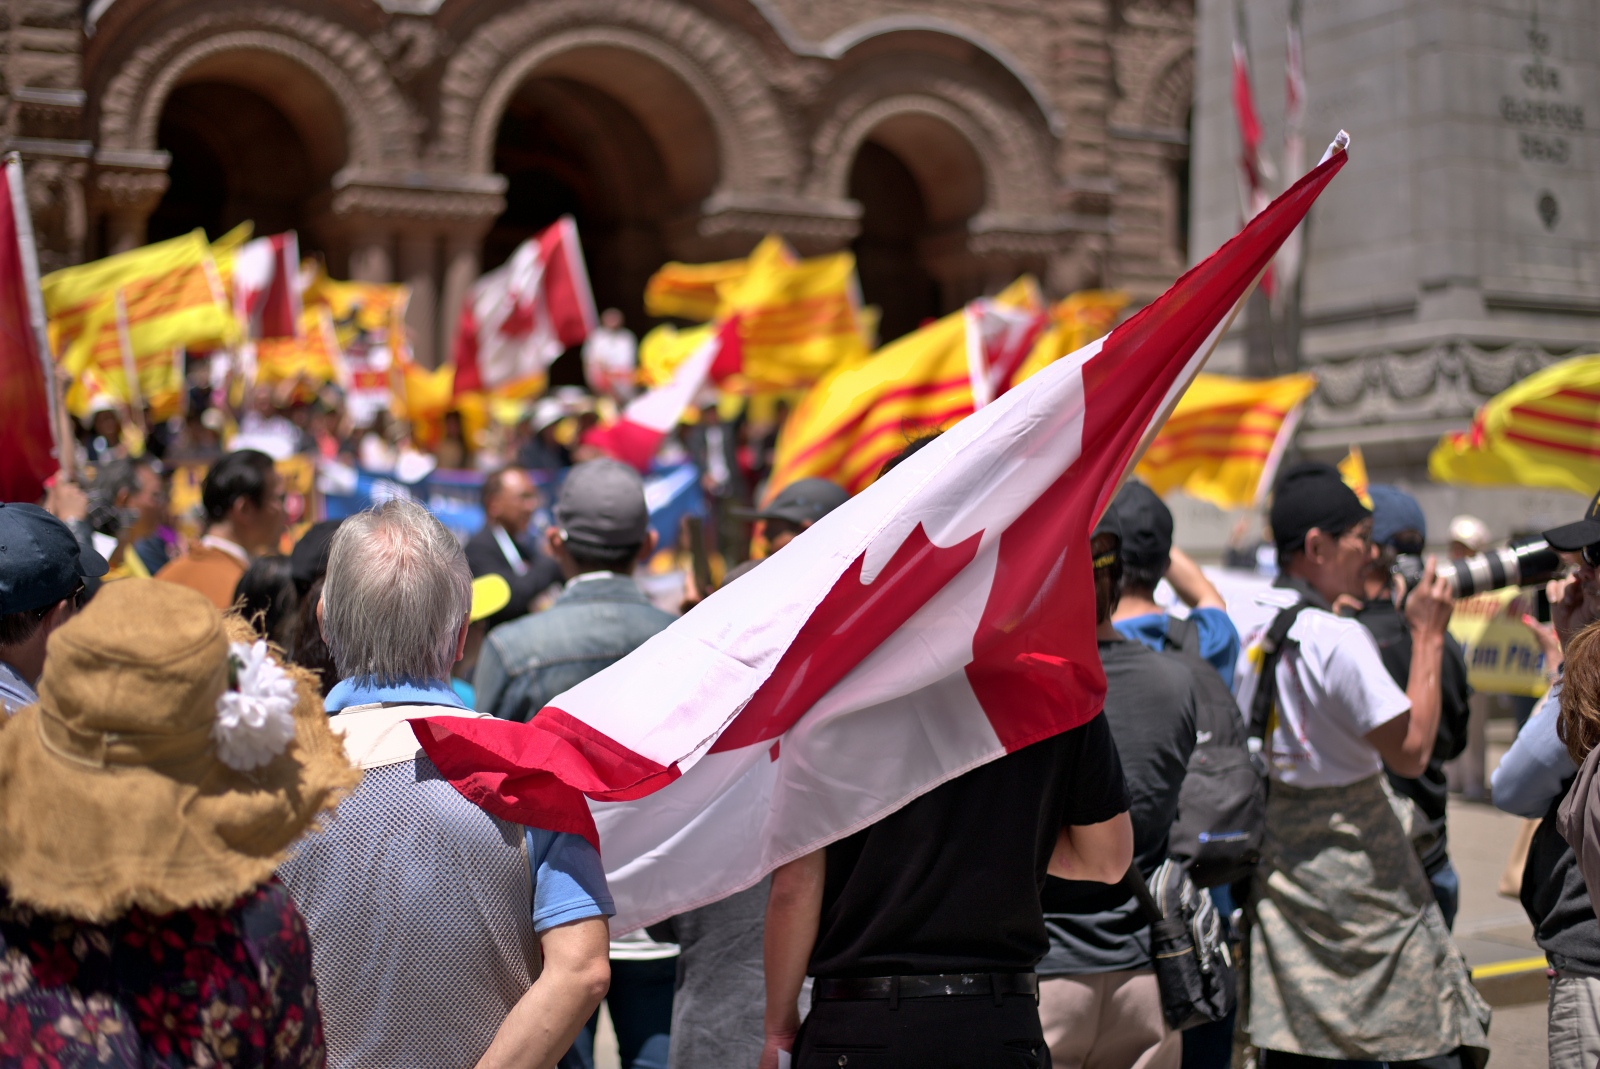  Vietnam protesters at Old City Hall, Toronot over economic zones law 10JUNE2018